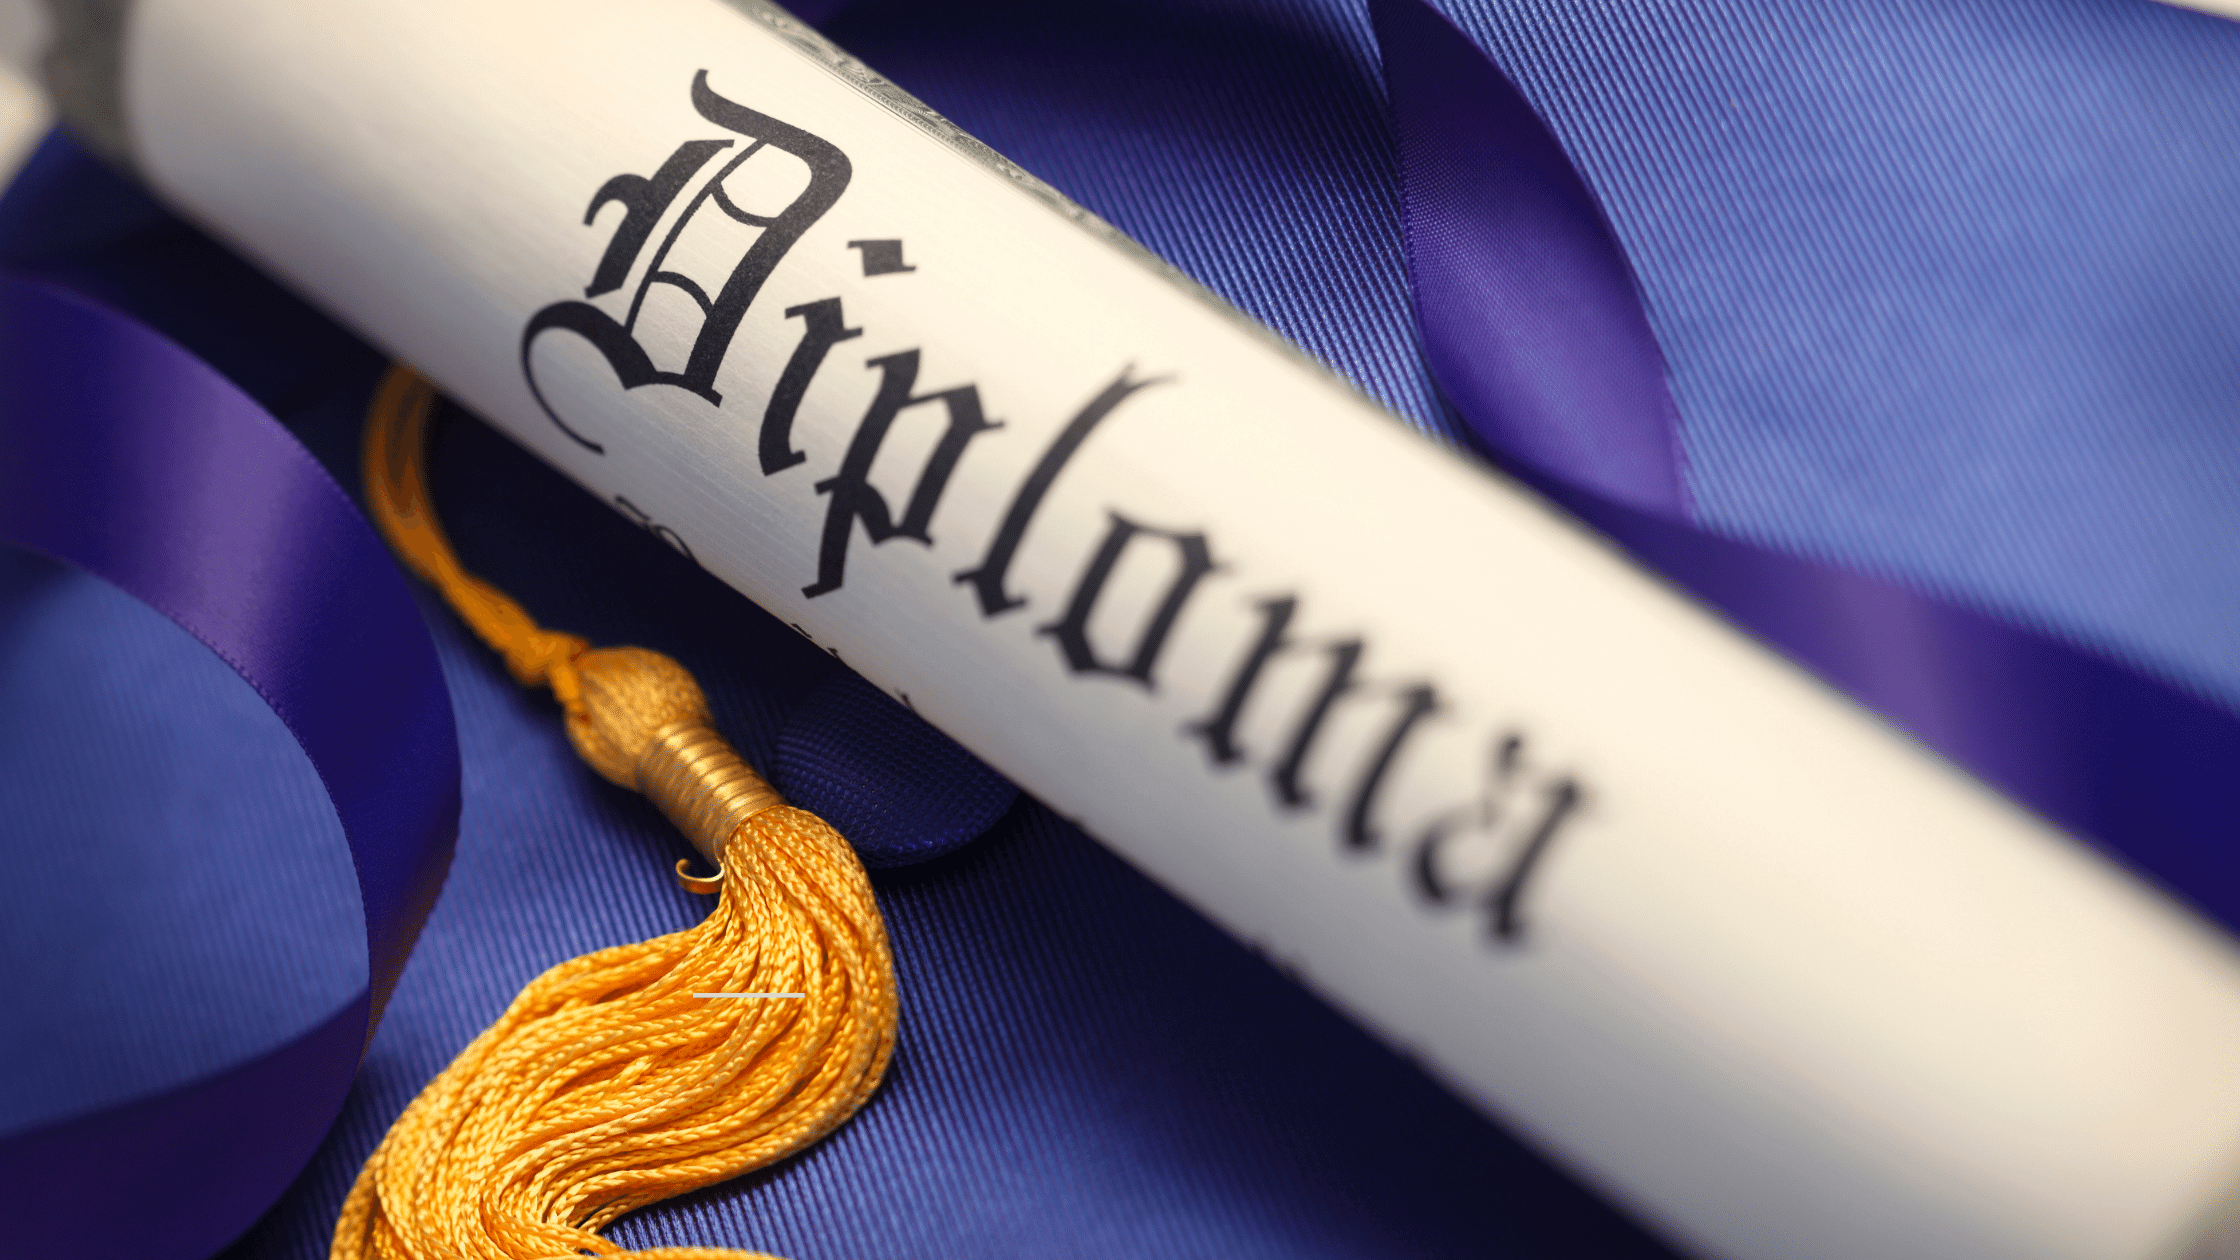 diploma rolled up next to purple cap and gown